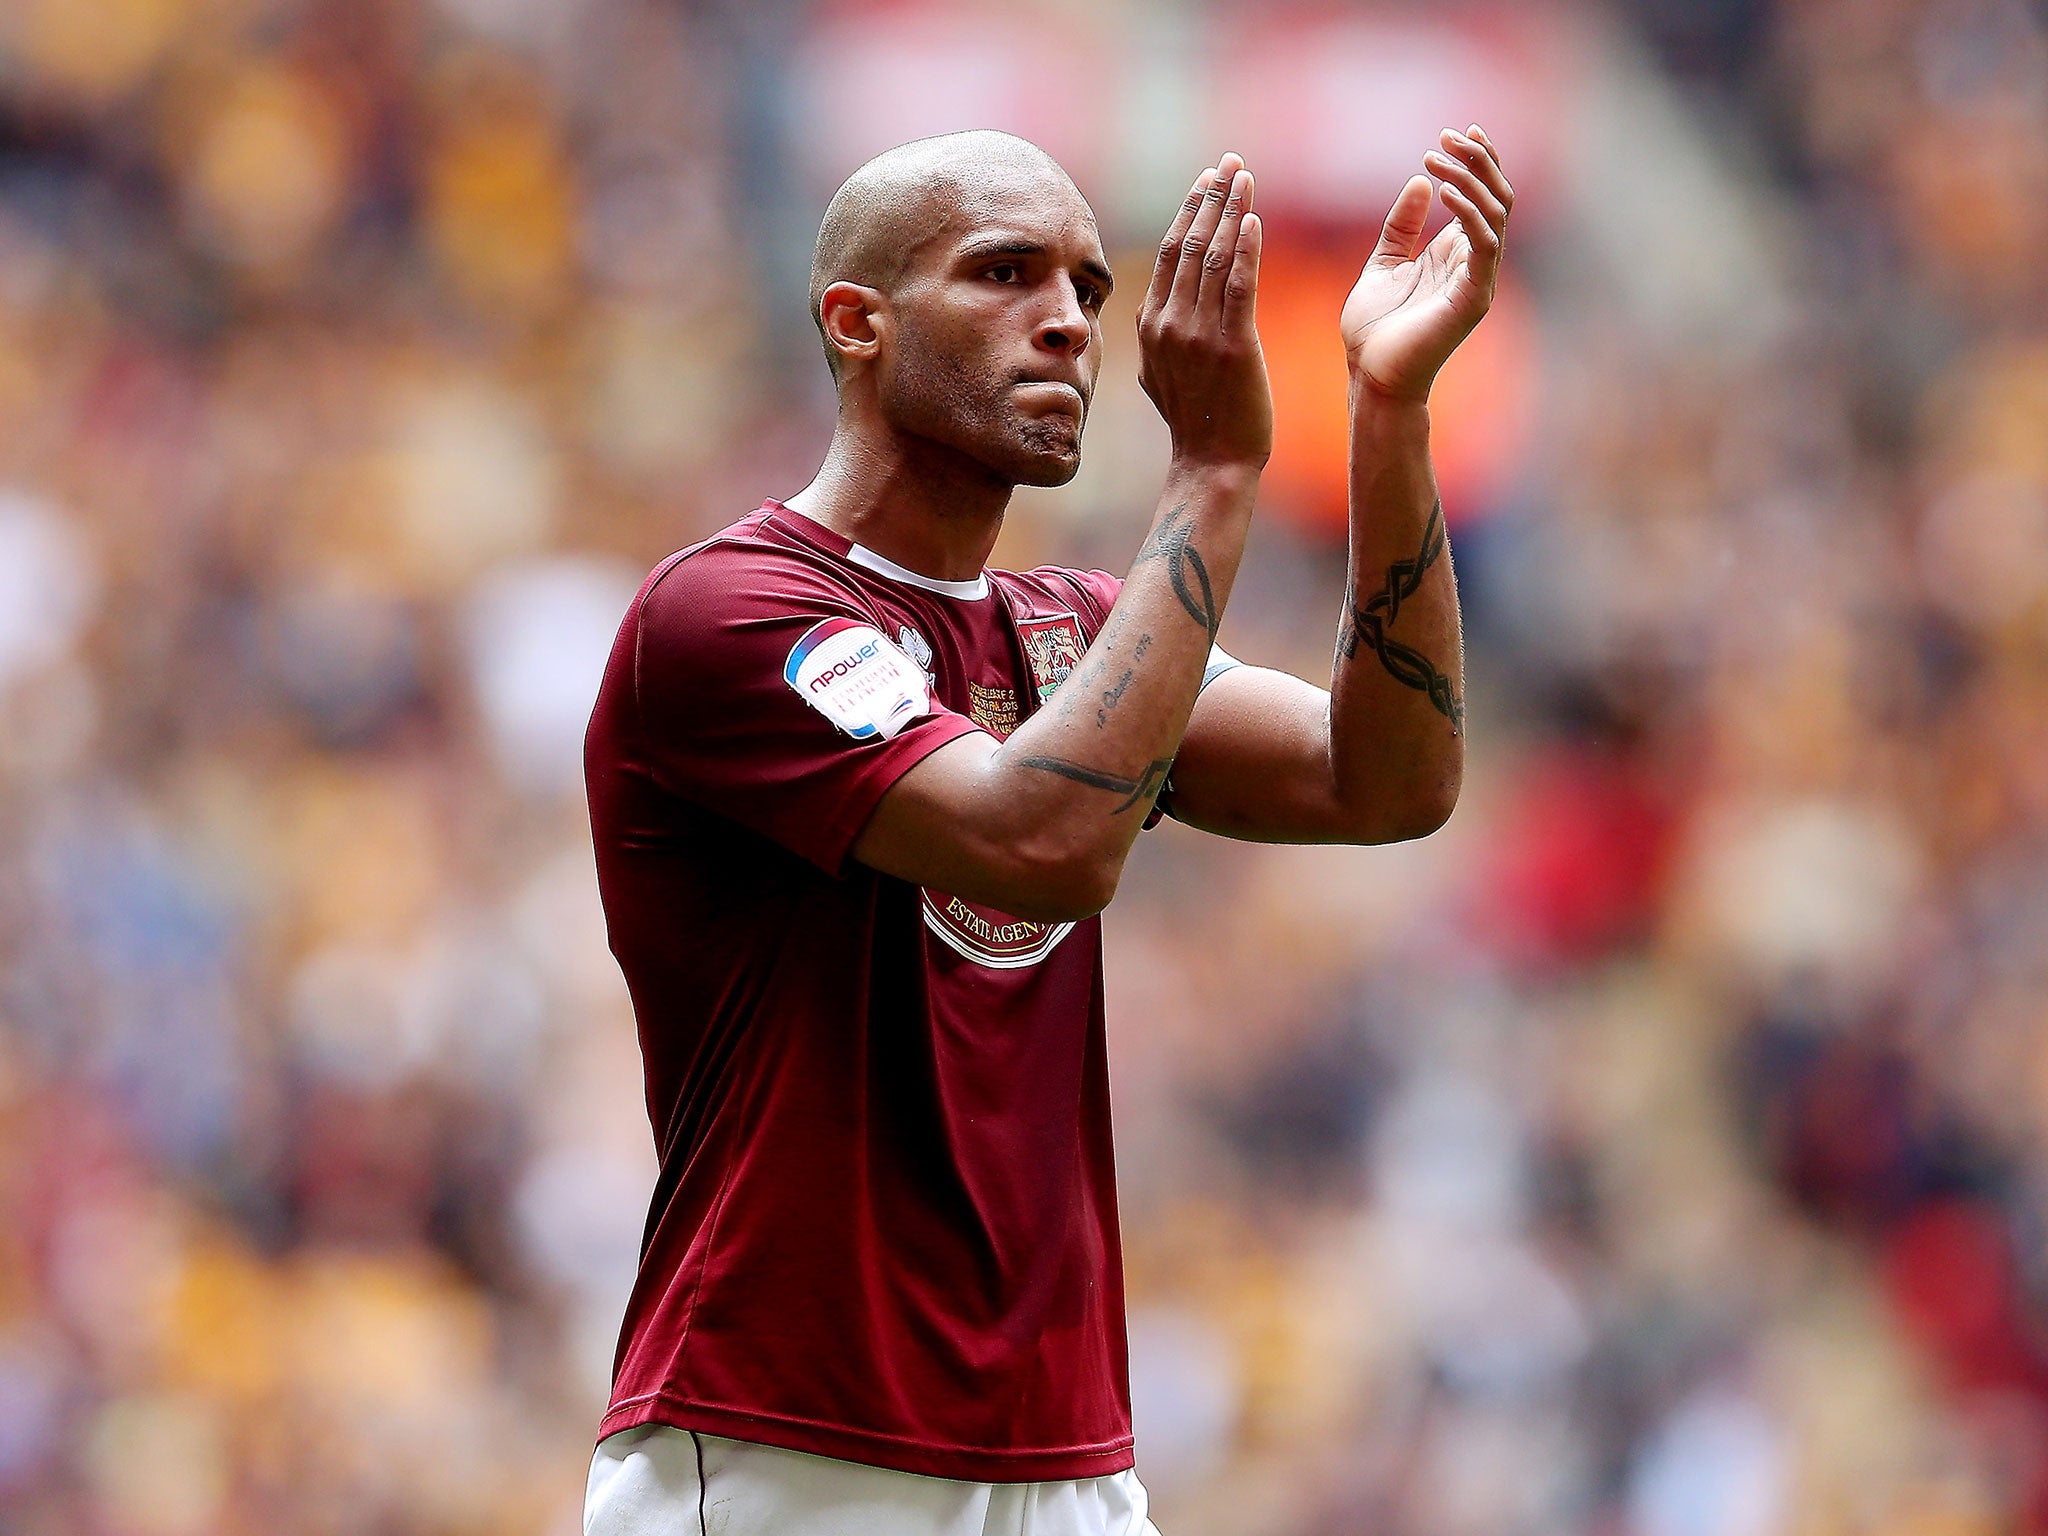 Clarke Carlisle applauds the Northampton fans in his final appearance before retirement